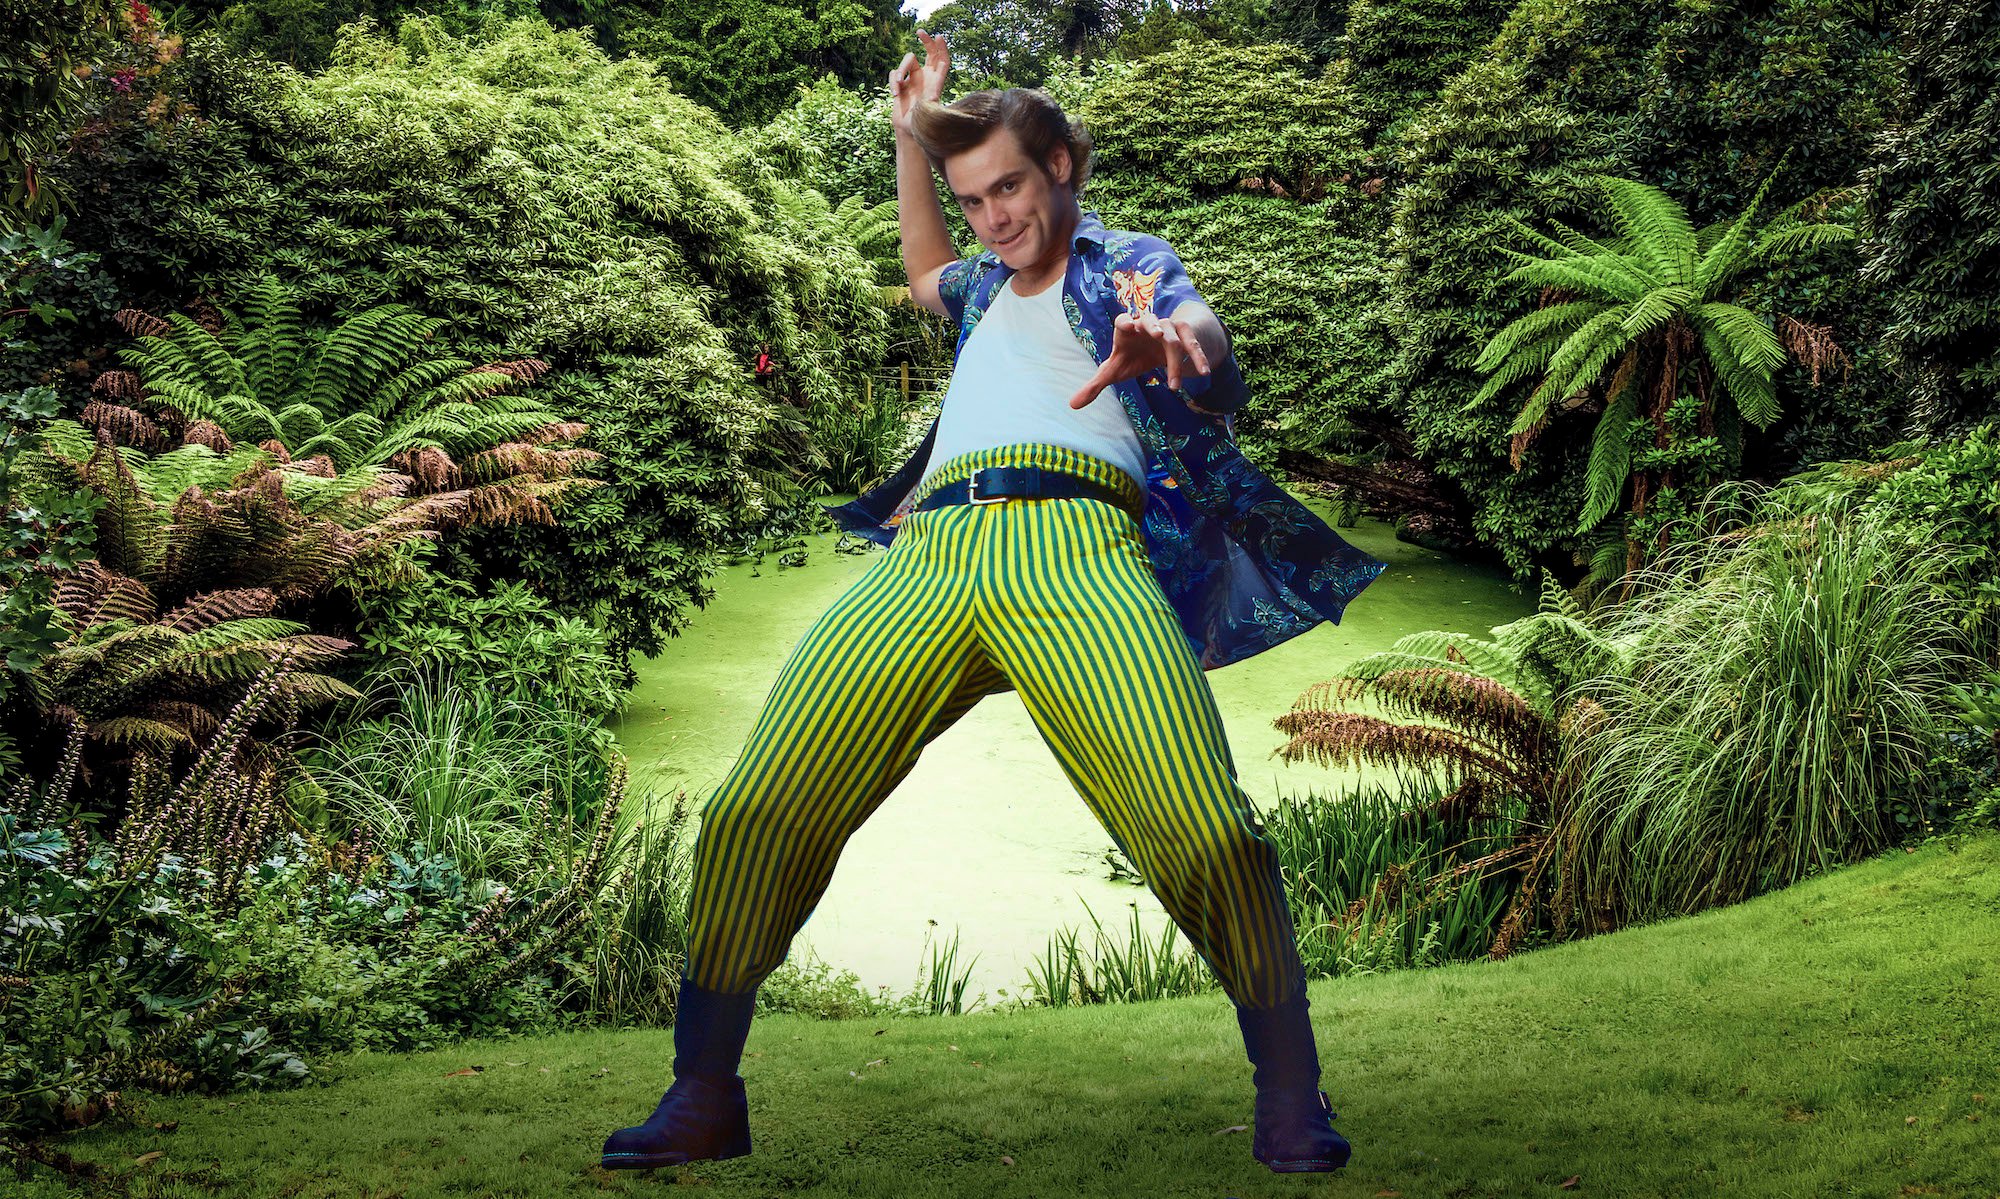 Jim Carrey as Ace Ventura posing for a photo in front of a pond and greenery